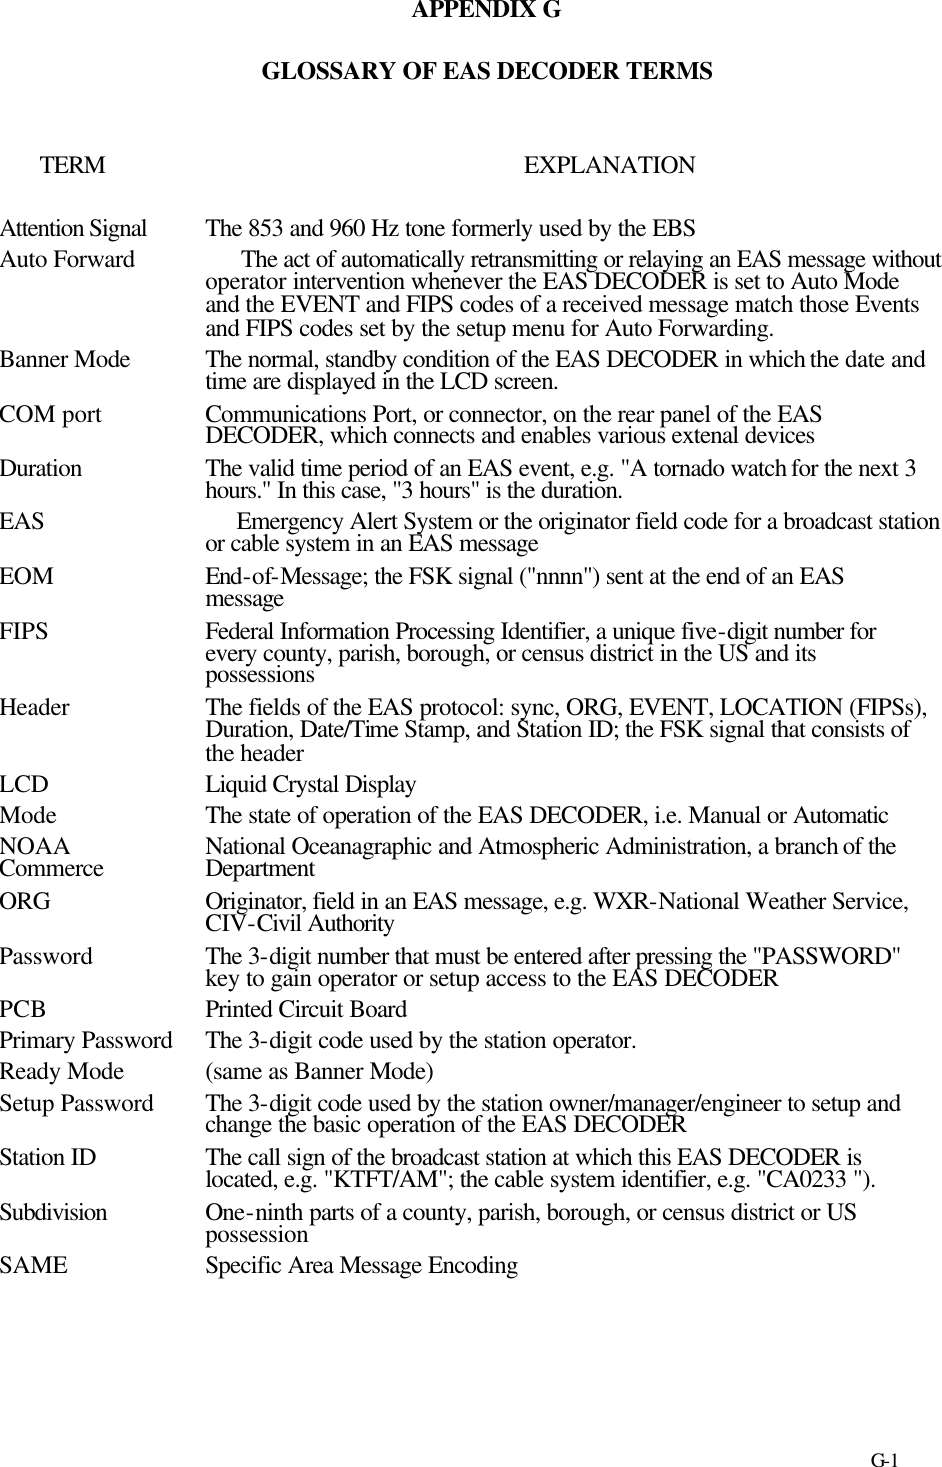     G-1 APPENDIX G  GLOSSARY OF EAS DECODER TERMS   TERM  EXPLANATION  Attention Signal  The 853 and 960 Hz tone formerly used by the EBS Auto Forward     The act of automatically retransmitting or relaying an EAS message without operator intervention whenever the EAS DECODER is set to Auto Mode and the EVENT and FIPS codes of a received message match those Events and FIPS codes set by the setup menu for Auto Forwarding. Banner Mode  The normal, standby condition of the EAS DECODER in which the date and time are displayed in the LCD screen. COM port  Communications Port, or connector, on the rear panel of the EAS DECODER, which connects and enables various extenal devices  Duration The valid time period of an EAS event, e.g. &quot;A tornado watch for the next 3 hours.&quot; In this case, &quot;3 hours&quot; is the duration. EAS     Emergency Alert System or the originator field code for a broadcast station or cable system in an EAS message EOM  End-of-Message; the FSK signal (&quot;nnnn&quot;) sent at the end of an EAS message FIPS  Federal Information Processing Identifier, a unique five-digit number for every county, parish, borough, or census district in the US and its possessions Header The fields of the EAS protocol: sync, ORG, EVENT, LOCATION (FIPSs), Duration, Date/Time Stamp, and Station ID; the FSK signal that consists of the header LCD  Liquid Crystal Display Mode The state of operation of the EAS DECODER, i.e. Manual or Automatic NOAA National Oceanagraphic and Atmospheric Administration, a branch of the Commerce  Department ORG  Originator, field in an EAS message, e.g. WXR-National Weather Service, CIV-Civil Authority Password  The 3-digit number that must be entered after pressing the &quot;PASSWORD&quot; key to gain operator or setup access to the EAS DECODER PCB Printed Circuit Board Primary Password  The 3-digit code used by the station operator. Ready Mode  (same as Banner Mode) Setup Password  The 3-digit code used by the station owner/manager/engineer to setup and change the basic operation of the EAS DECODER Station ID  The call sign of the broadcast station at which this EAS DECODER is located, e.g. &quot;KTFT/AM&quot;; the cable system identifier, e.g. &quot;CA0233 &quot;). Subdivision  One-ninth parts of a county, parish, borough, or census district or US possession SAME Specific Area Message Encoding    